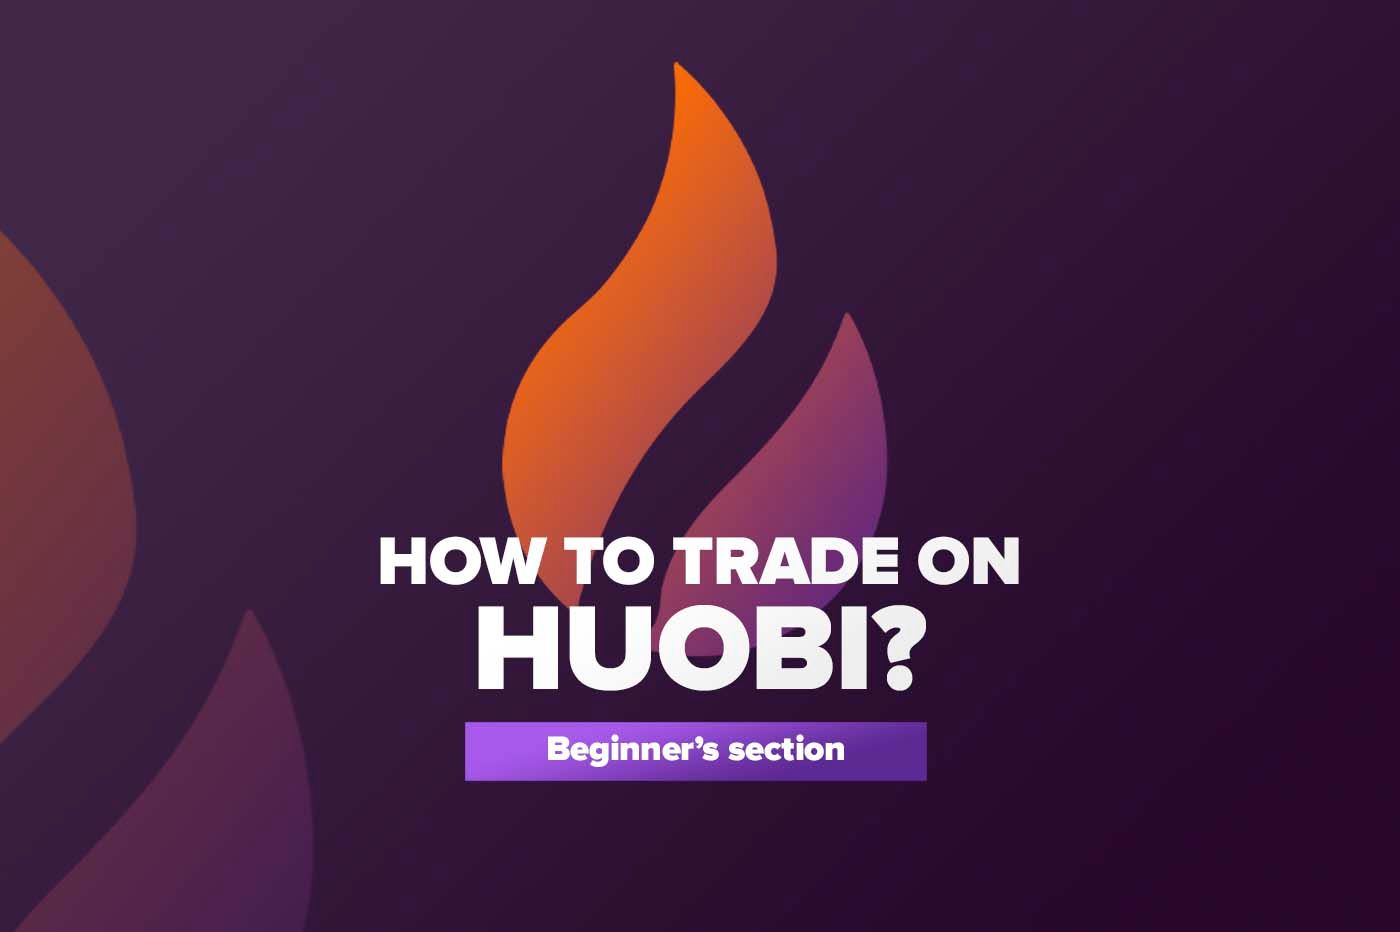 Article How to trade on Huobi?